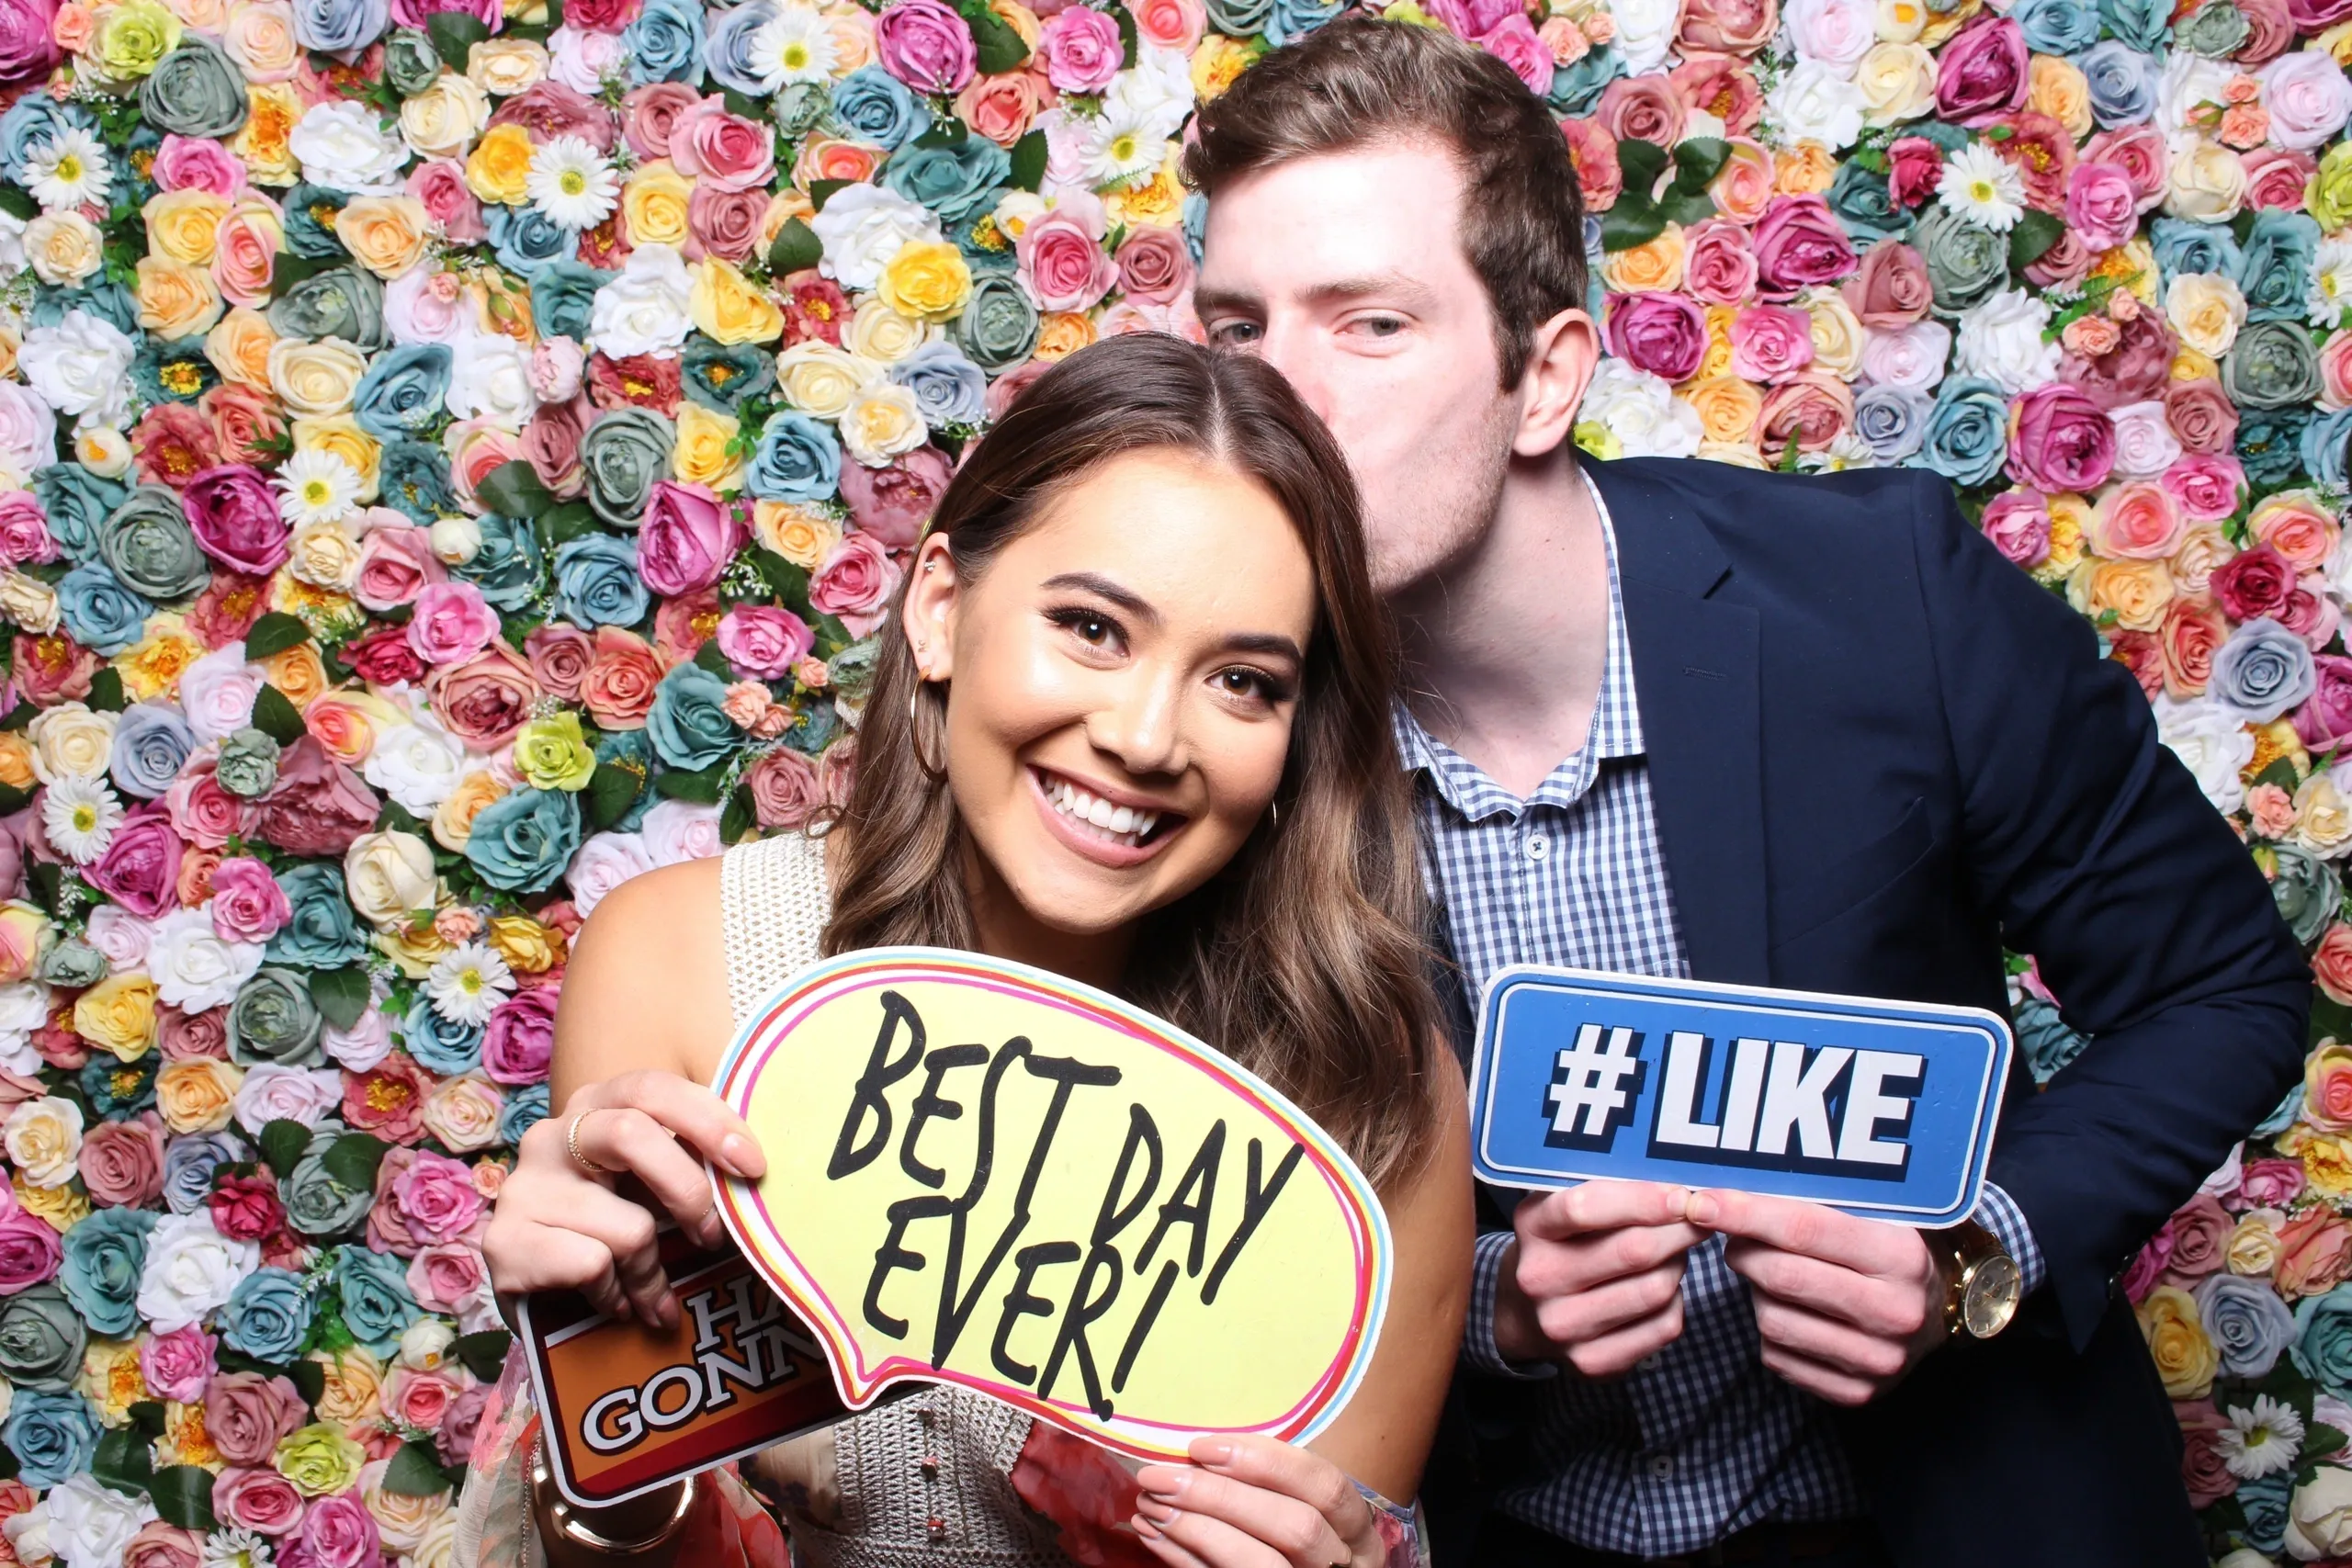 The Ultimate Photo Booth Experience in Brisbane